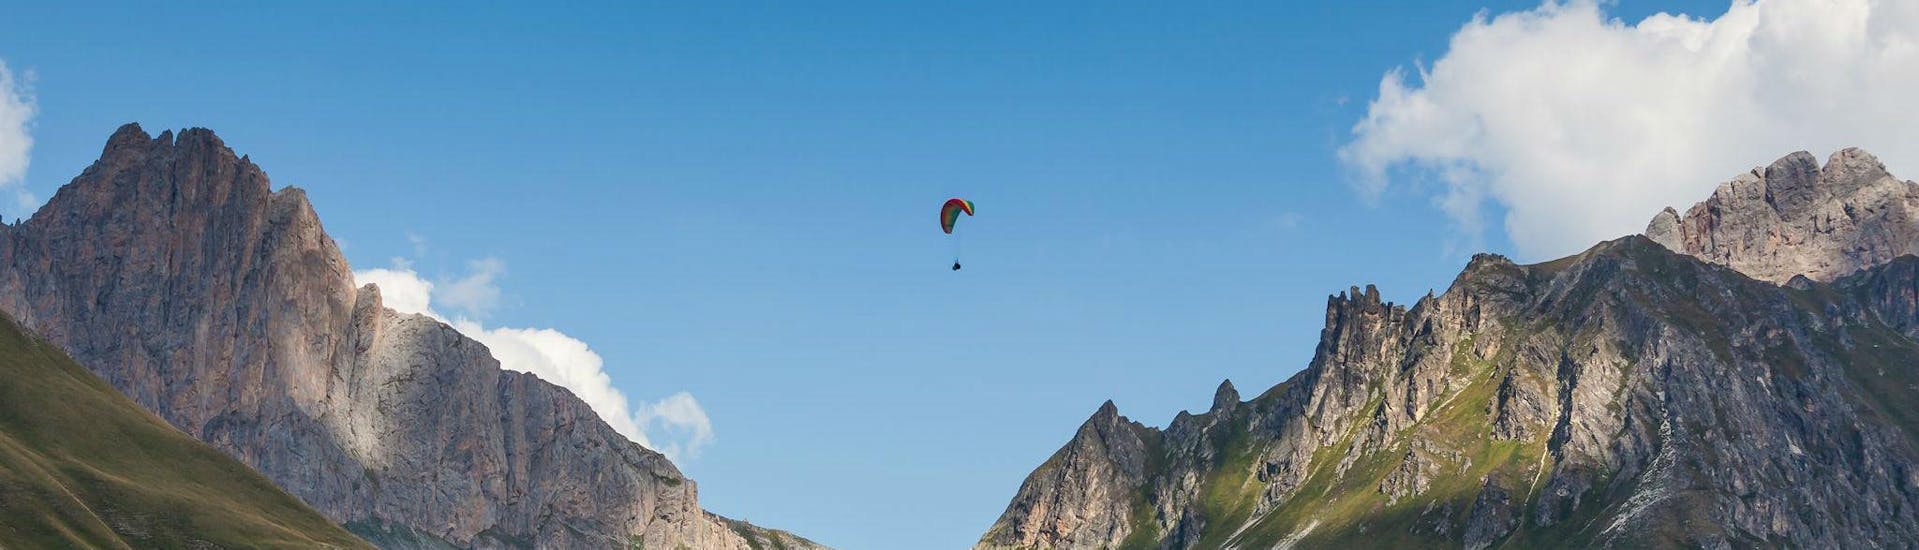 A paragliding pilot from Emotion'Air is doing a Tandem Paragliding Acrobatic Flight from the Col du Granon.